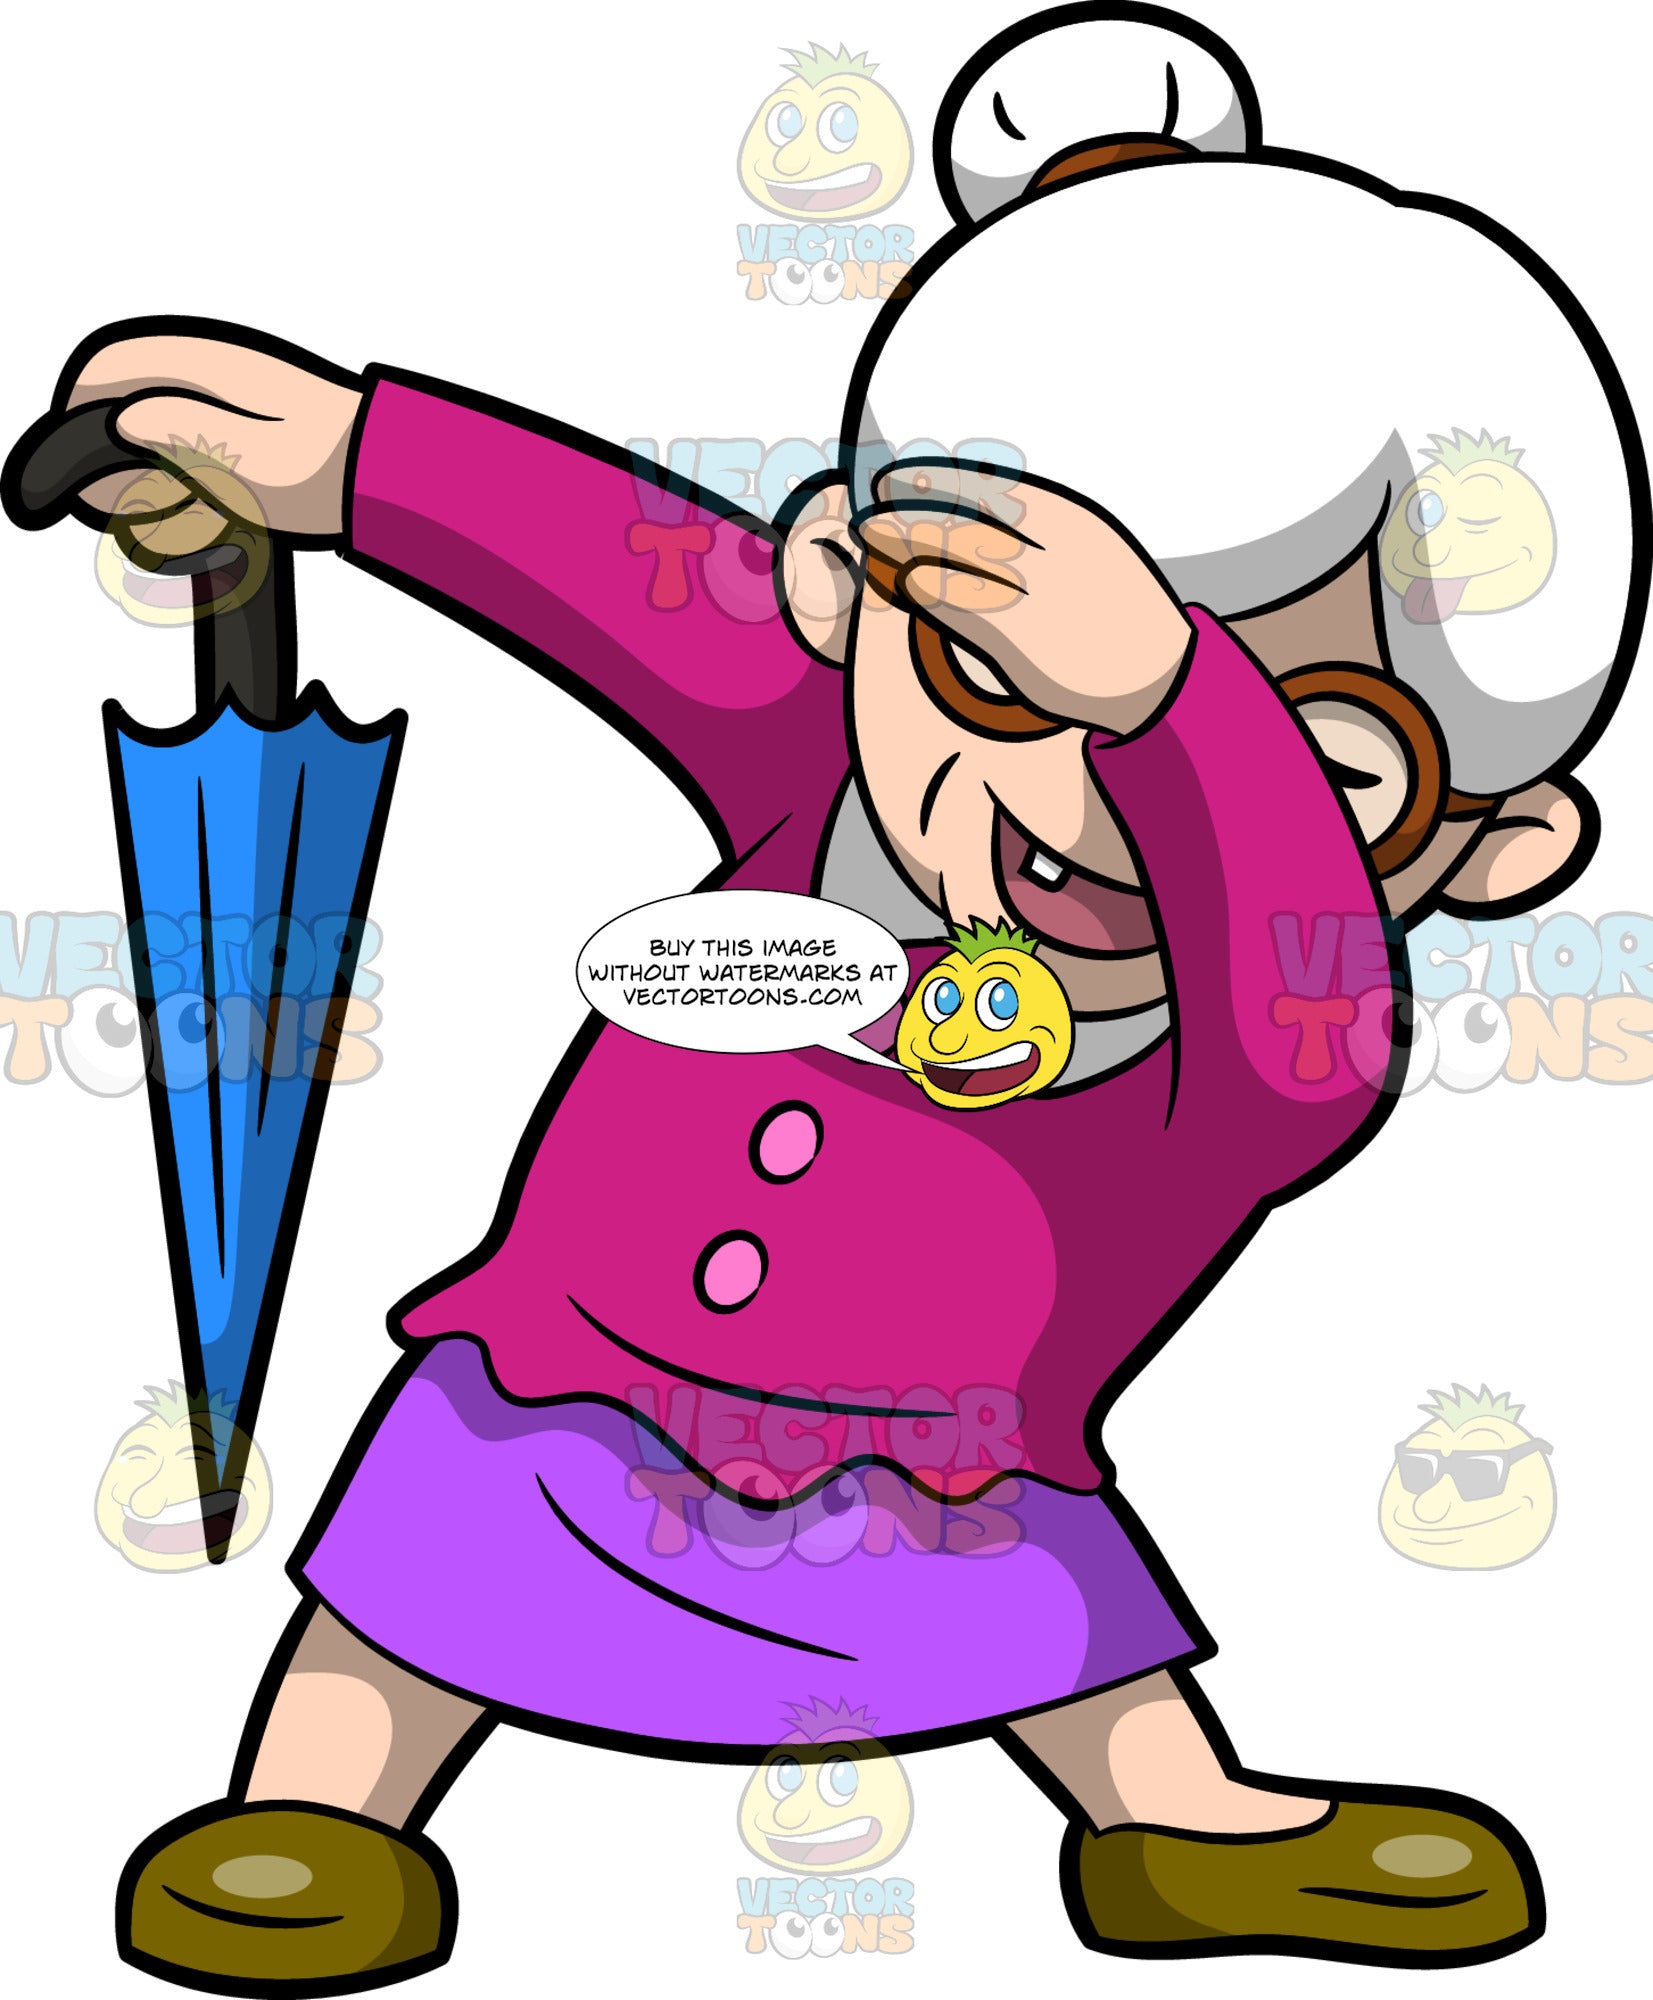 a dabbing grandmother clipart cartoons by vectortoons a dabbing grandmother clipart cartoons by vectortoons